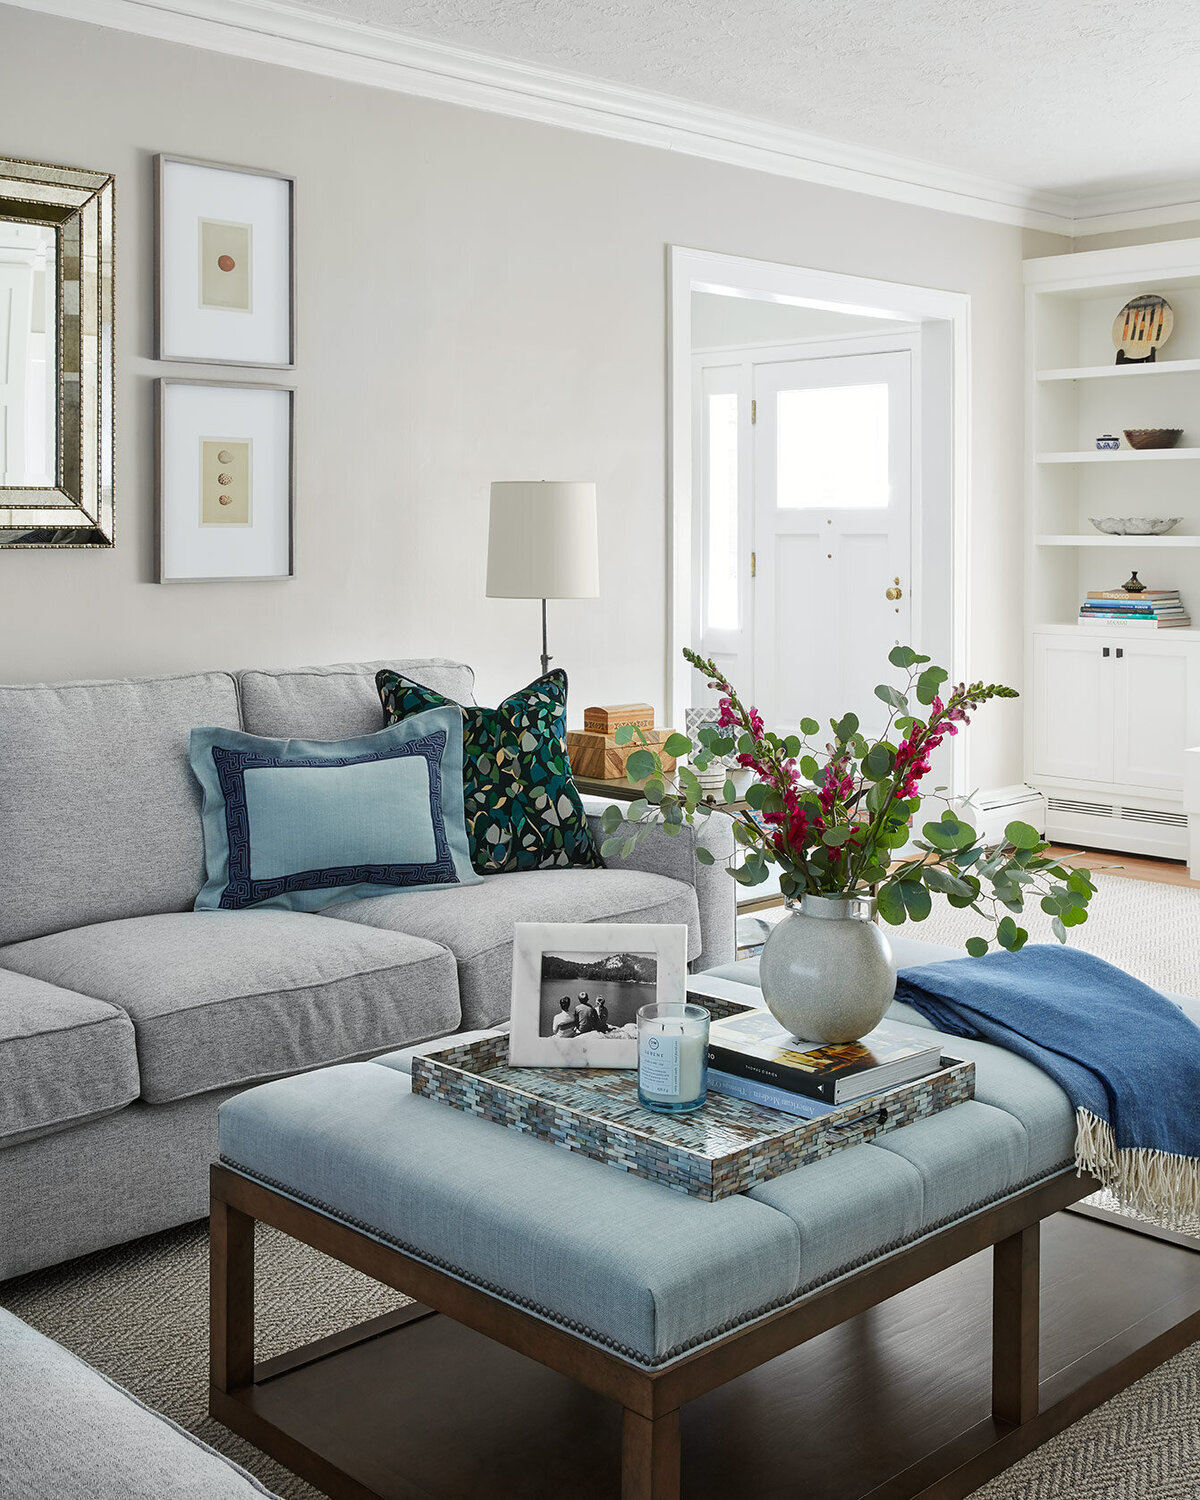 Living room with grey couch and light blue accents